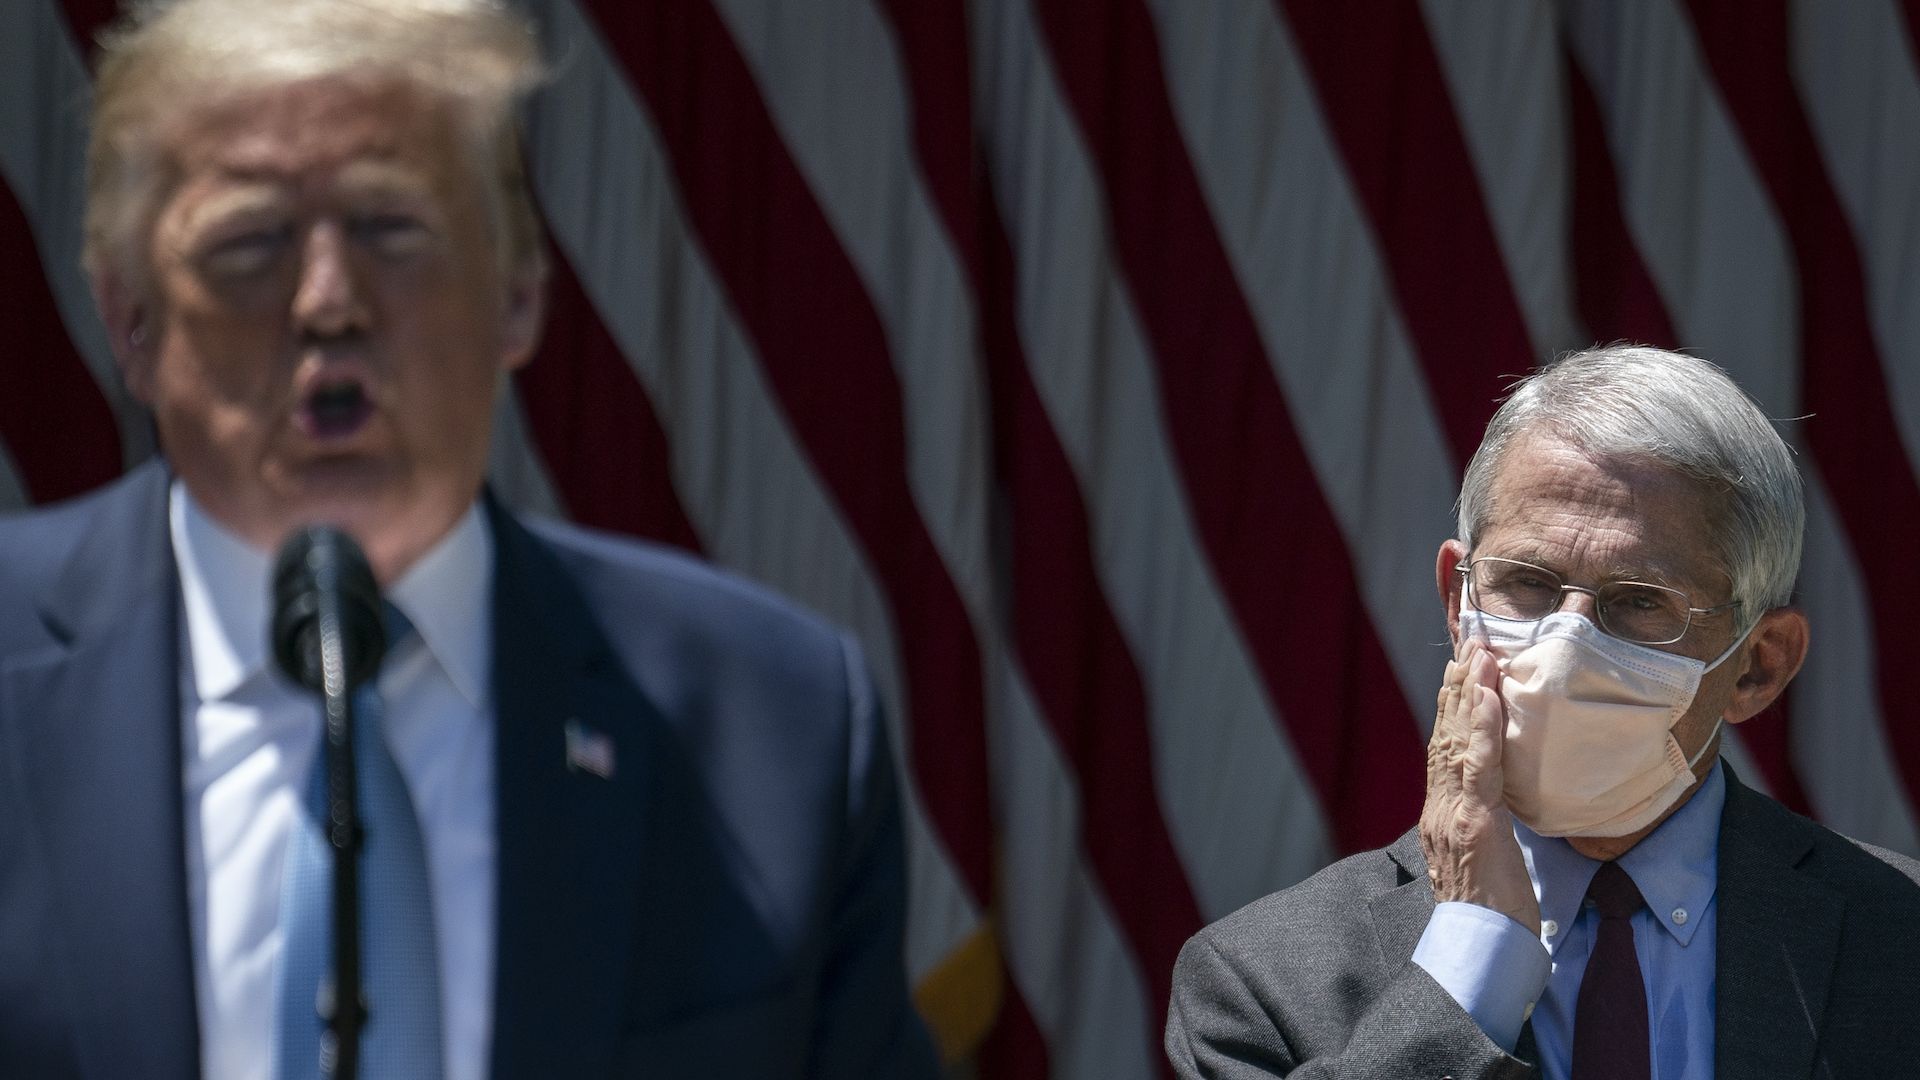 Photo of Dr. Anthony Fauci rubbing his masked face as he watches President Trump give a speech